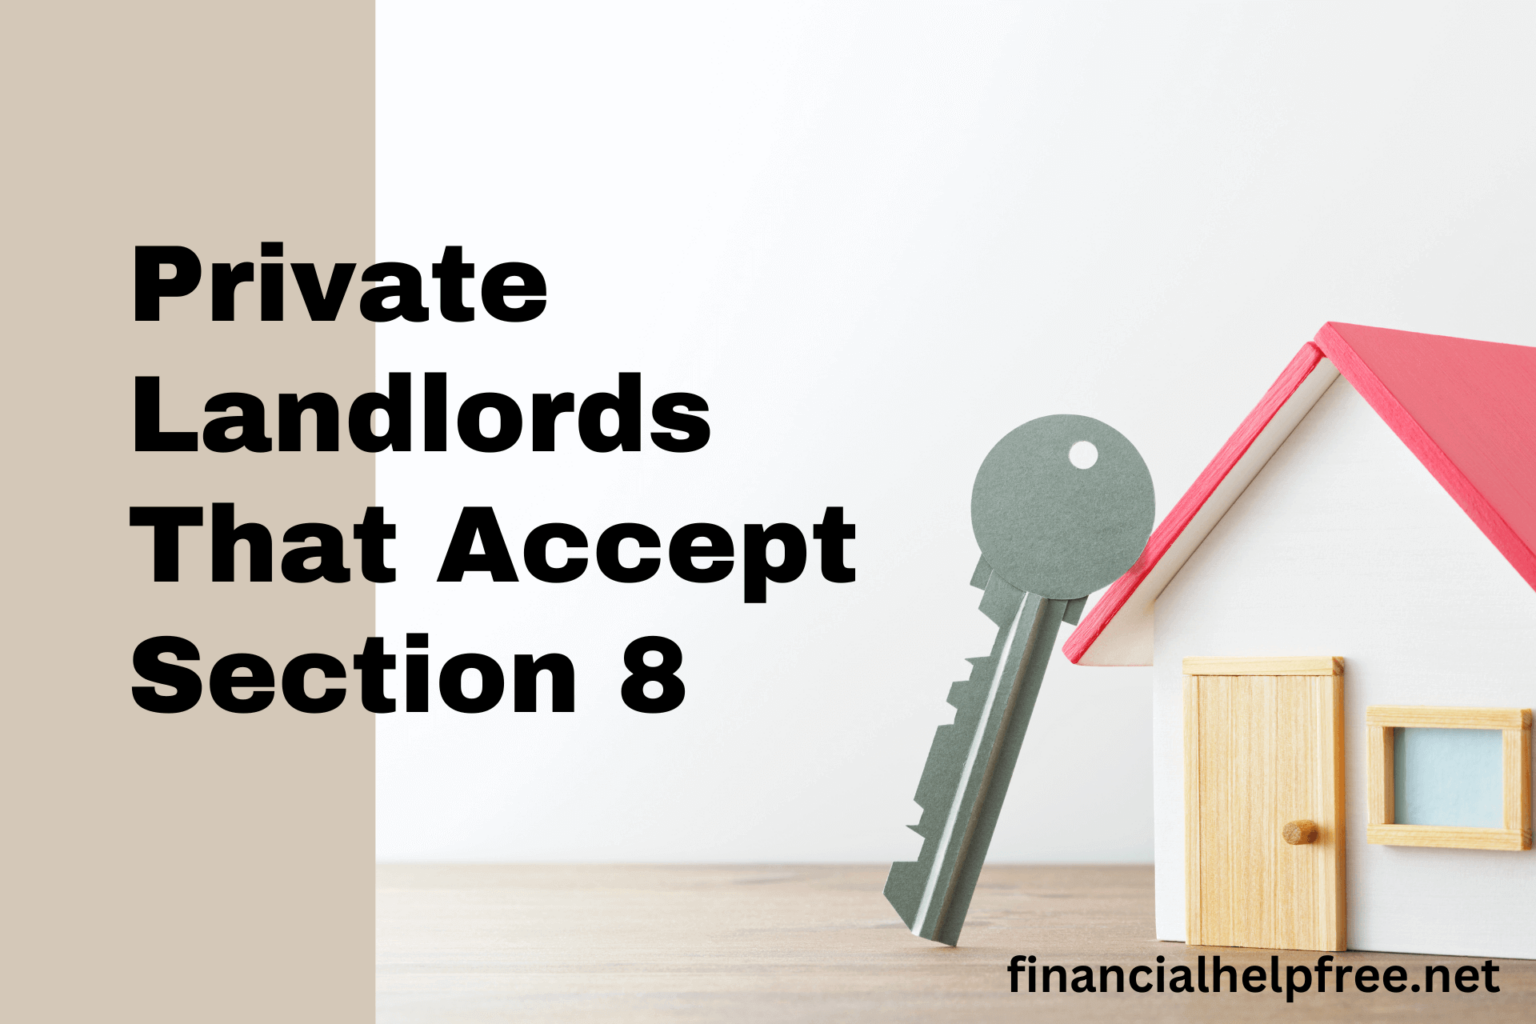 how-to-find-private-landlords-that-accept-section-8-full-guide